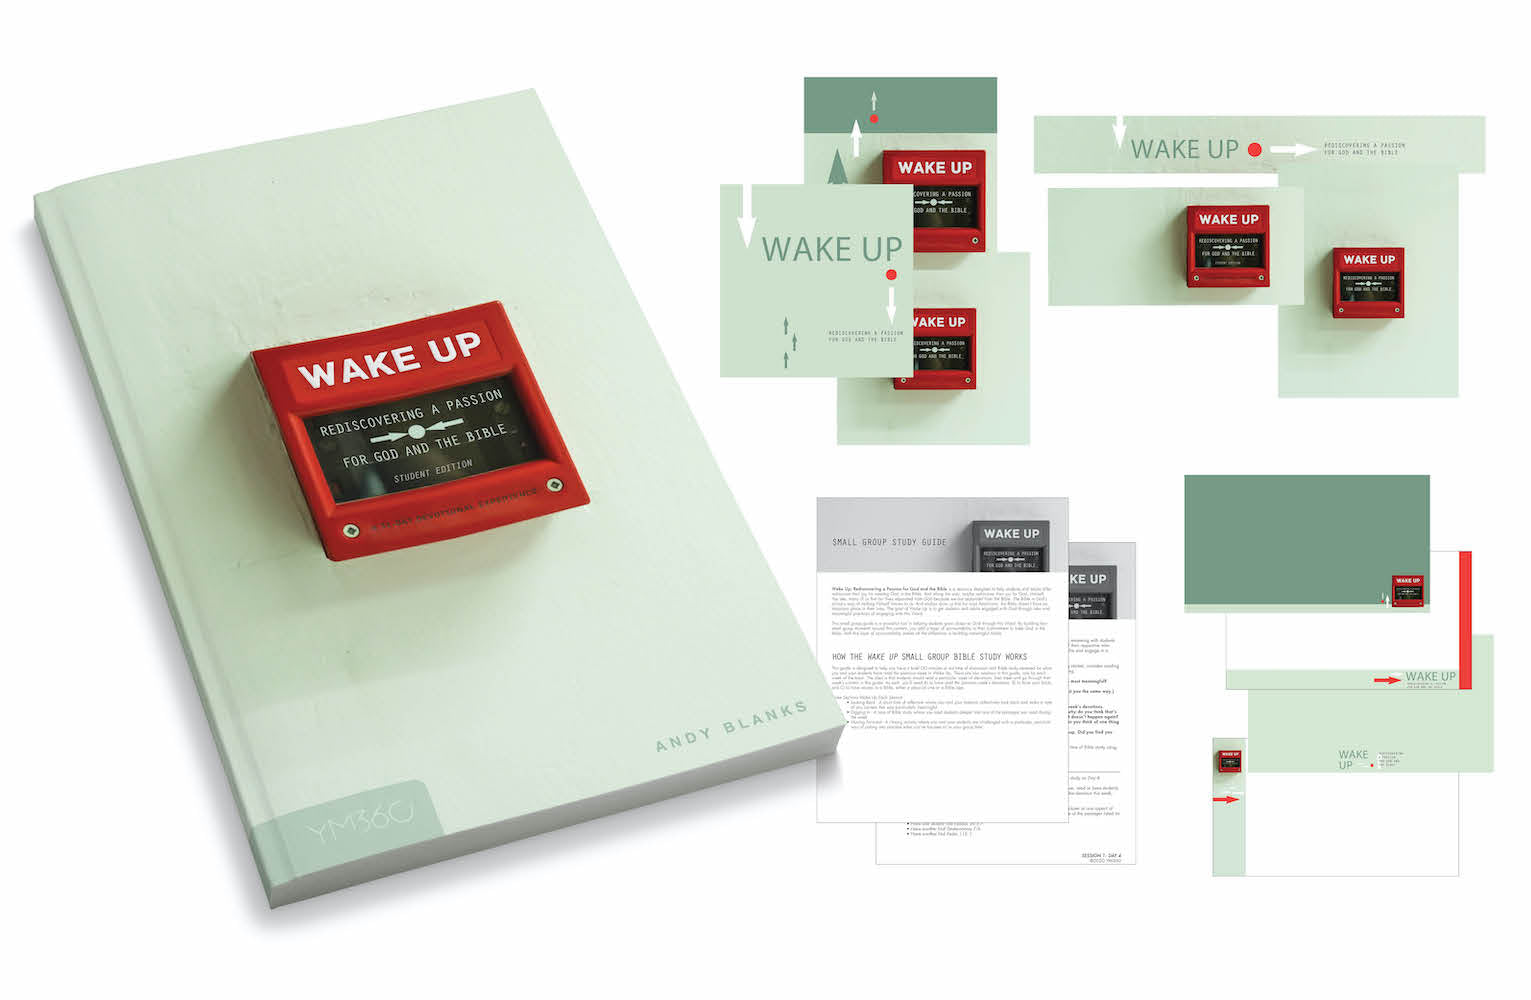 Wake Up: Rediscovering A Passion for God and the Bible [Student Edition]